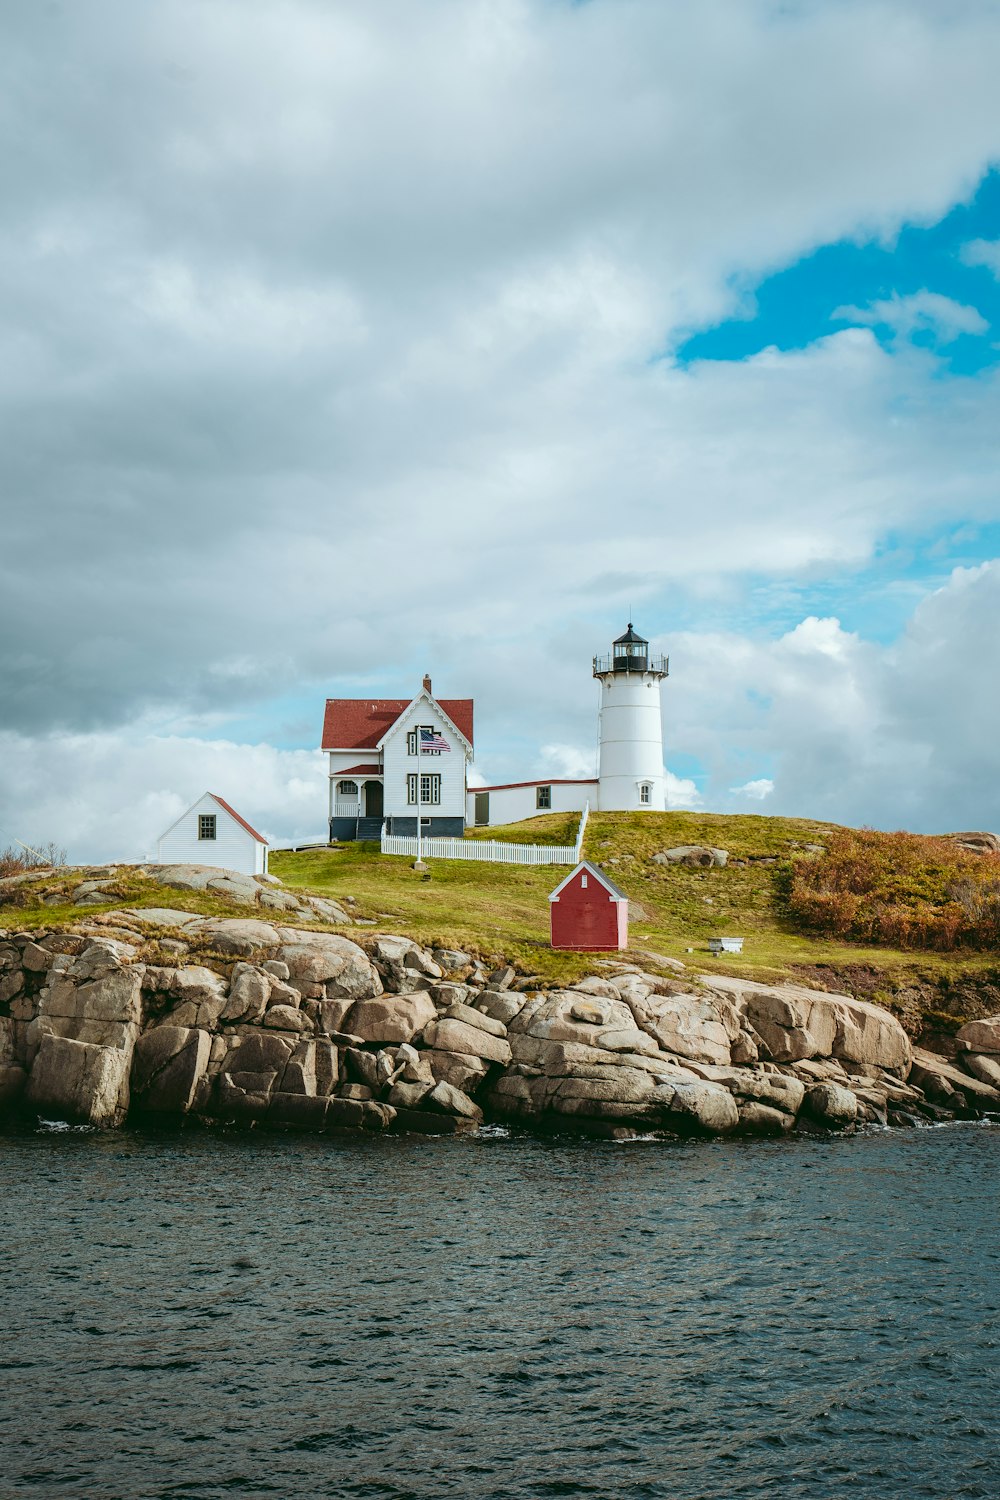 a red and white lighthouse on a rocky island